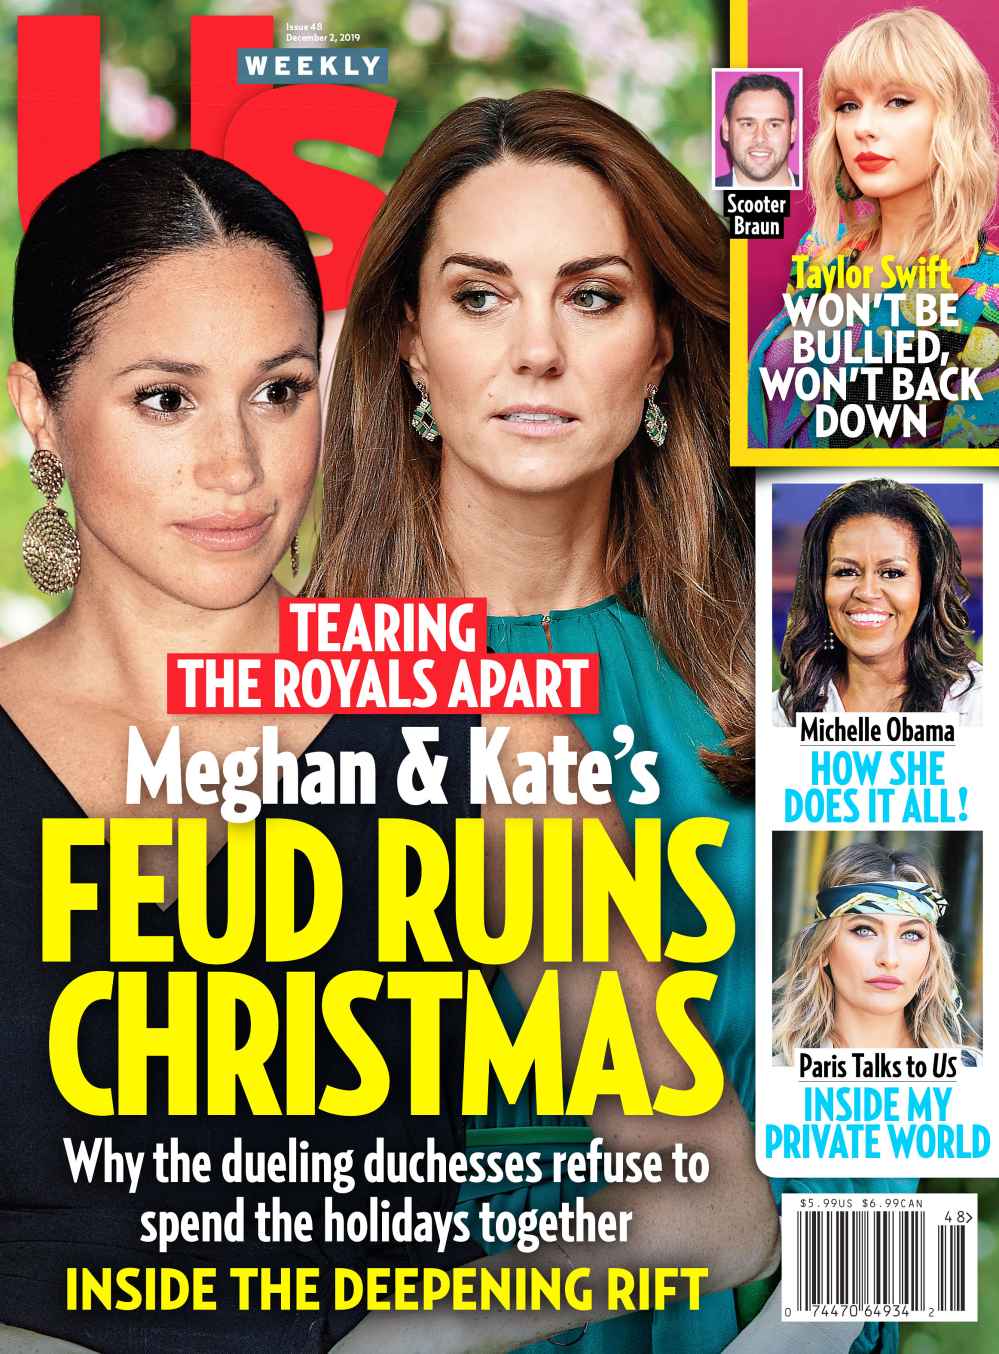 Us Weekly Cover Issue 4819 Duchess Meghan and Duchess Kate Feud Ruins Christmas